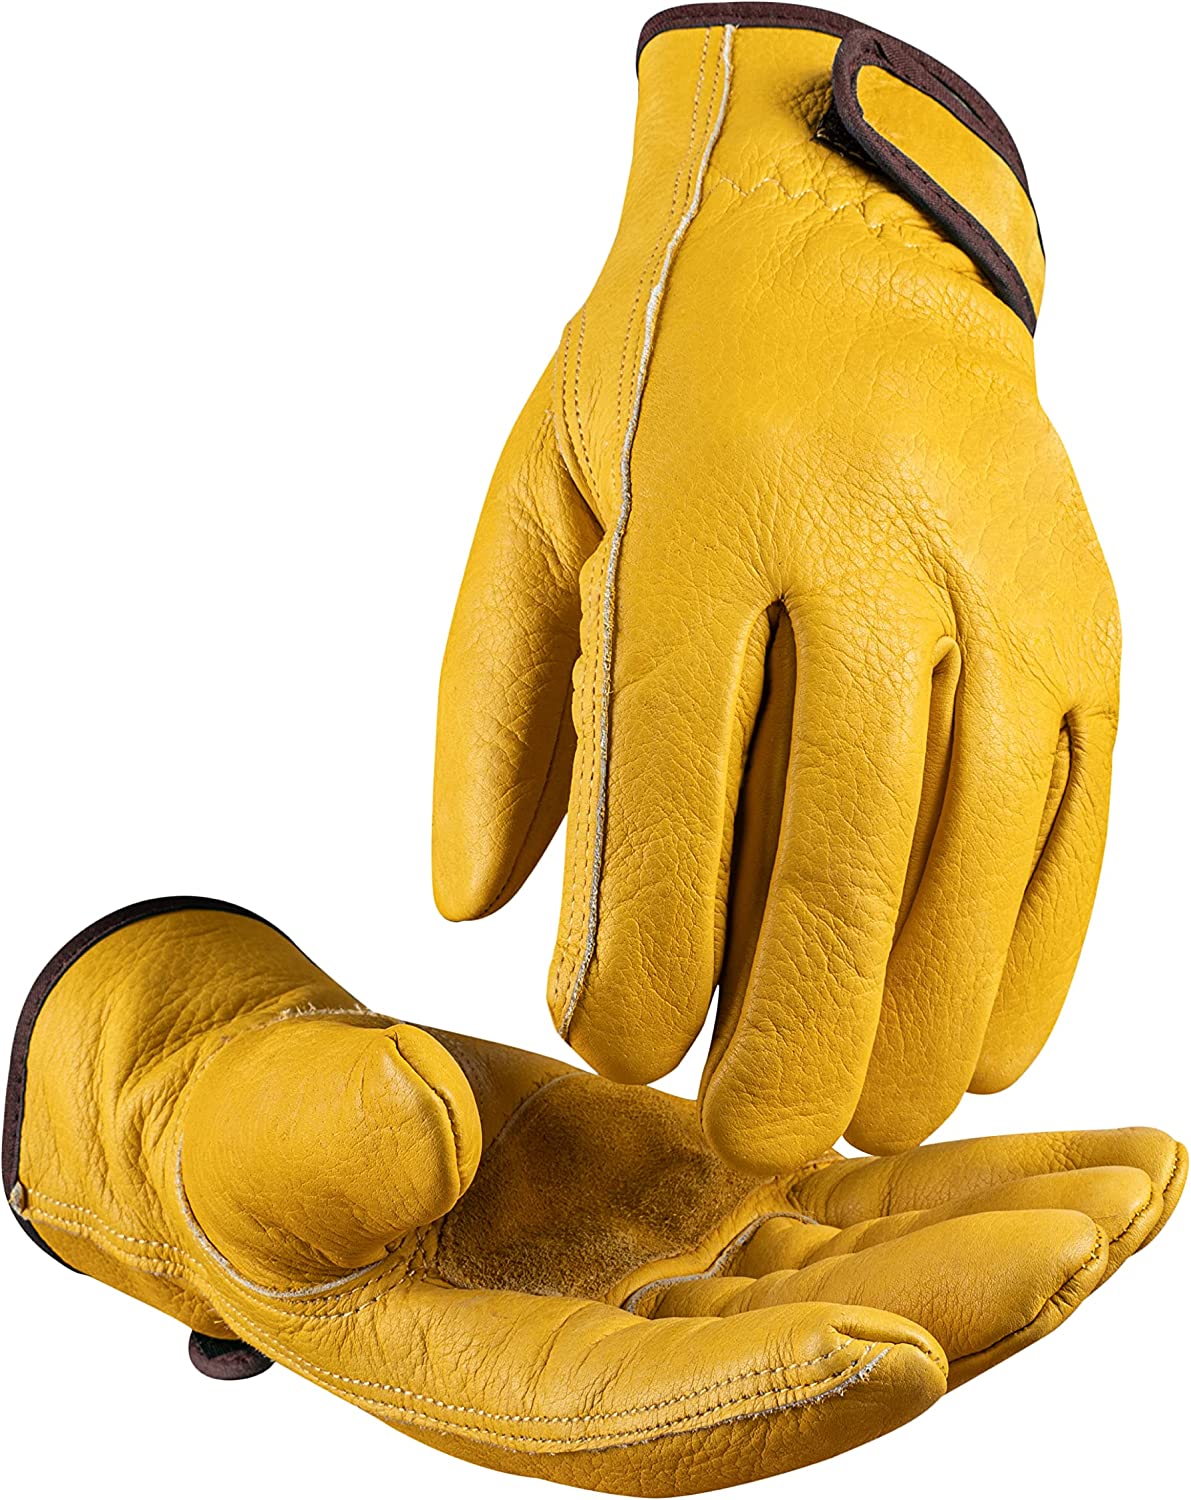 toolant Winter Leather Work Gloves w/ 3M Thinsulate Lining & Reinforced Palm Patch: 1-Pair $10, 2-Pair $19.50 + Free Shipping w/ Prime or on $25+